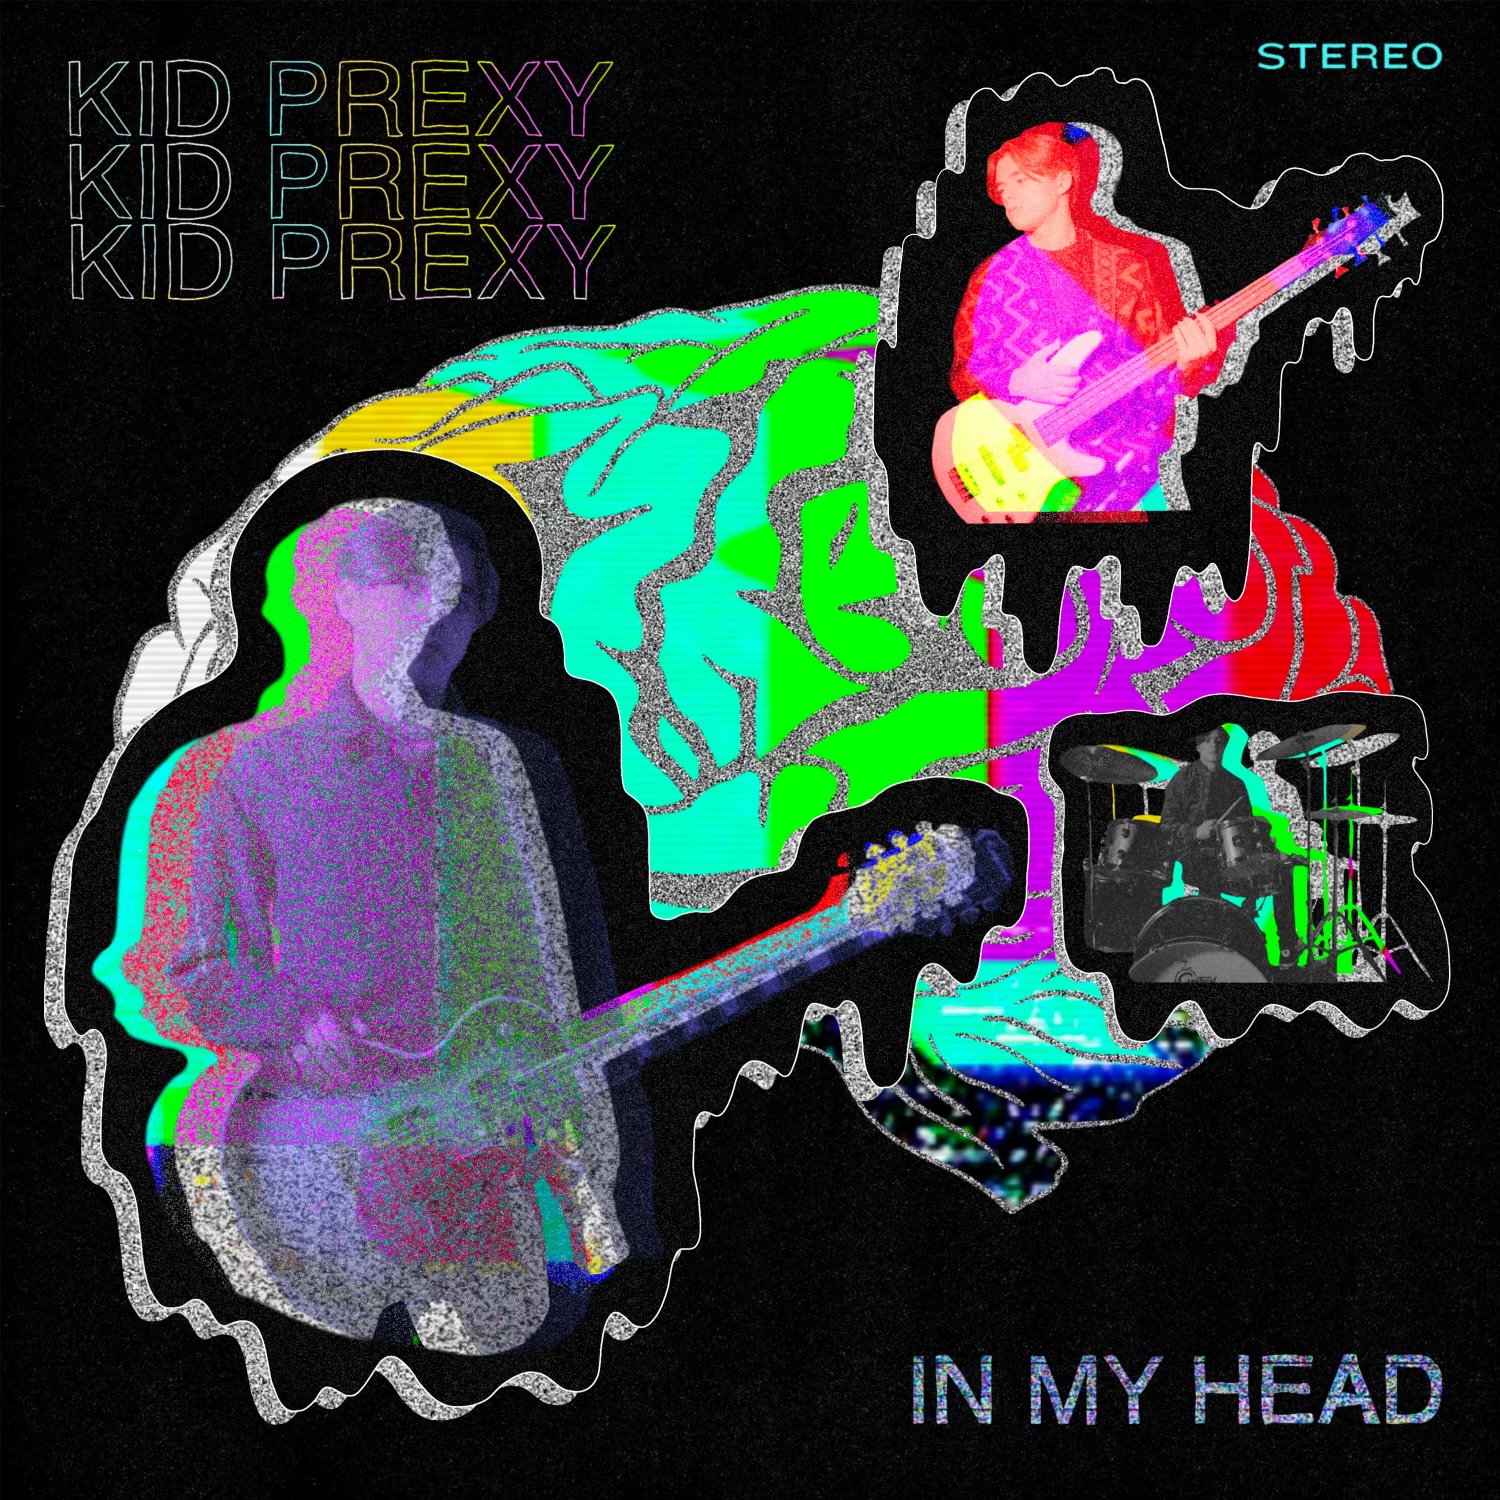 Artwork for the single “In My Head” by Kid Prexy